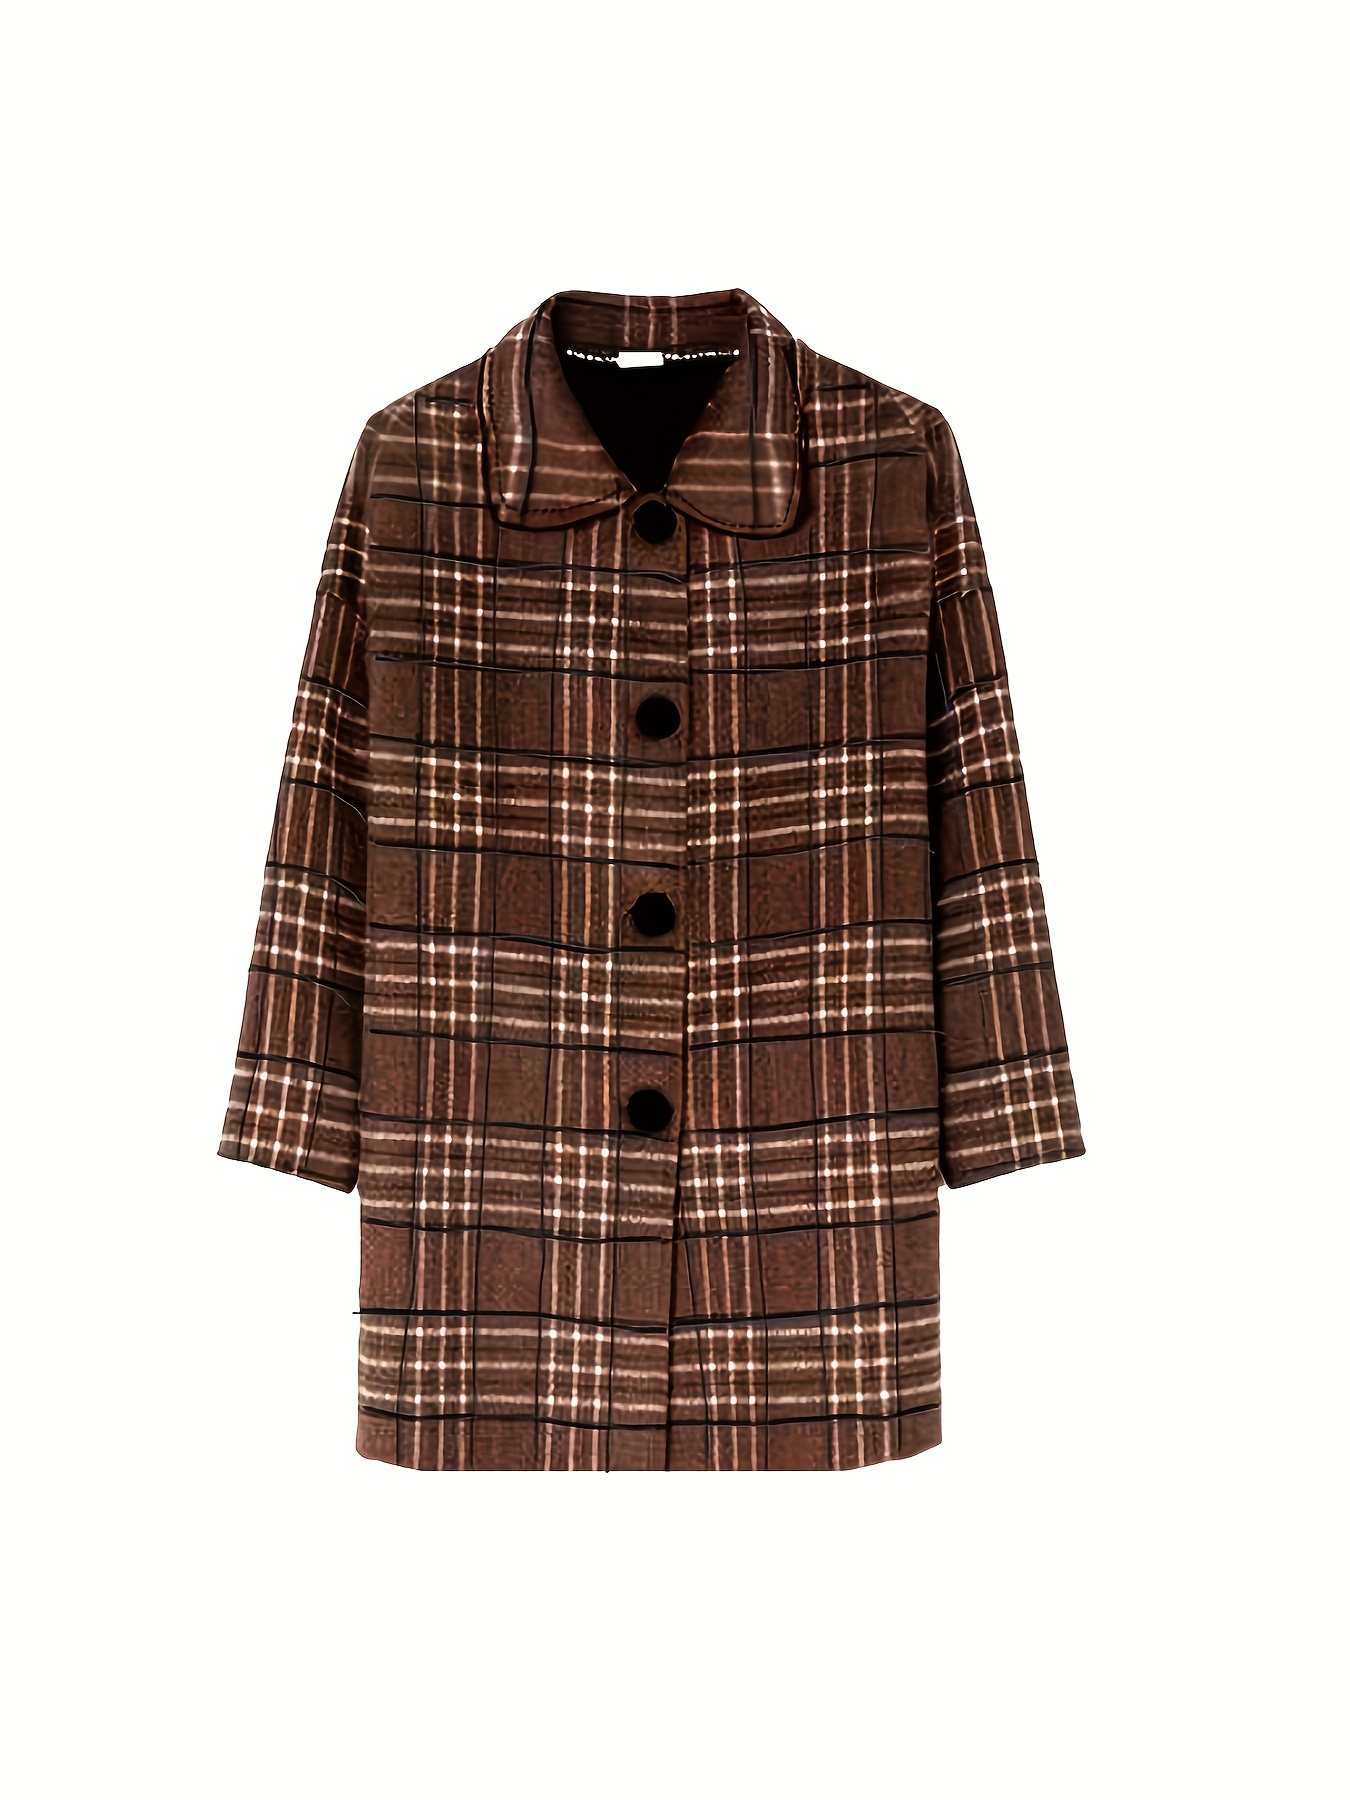 plaid pattern single breasted overcoat vintage long sleeve outwear for fall winter womens clothing